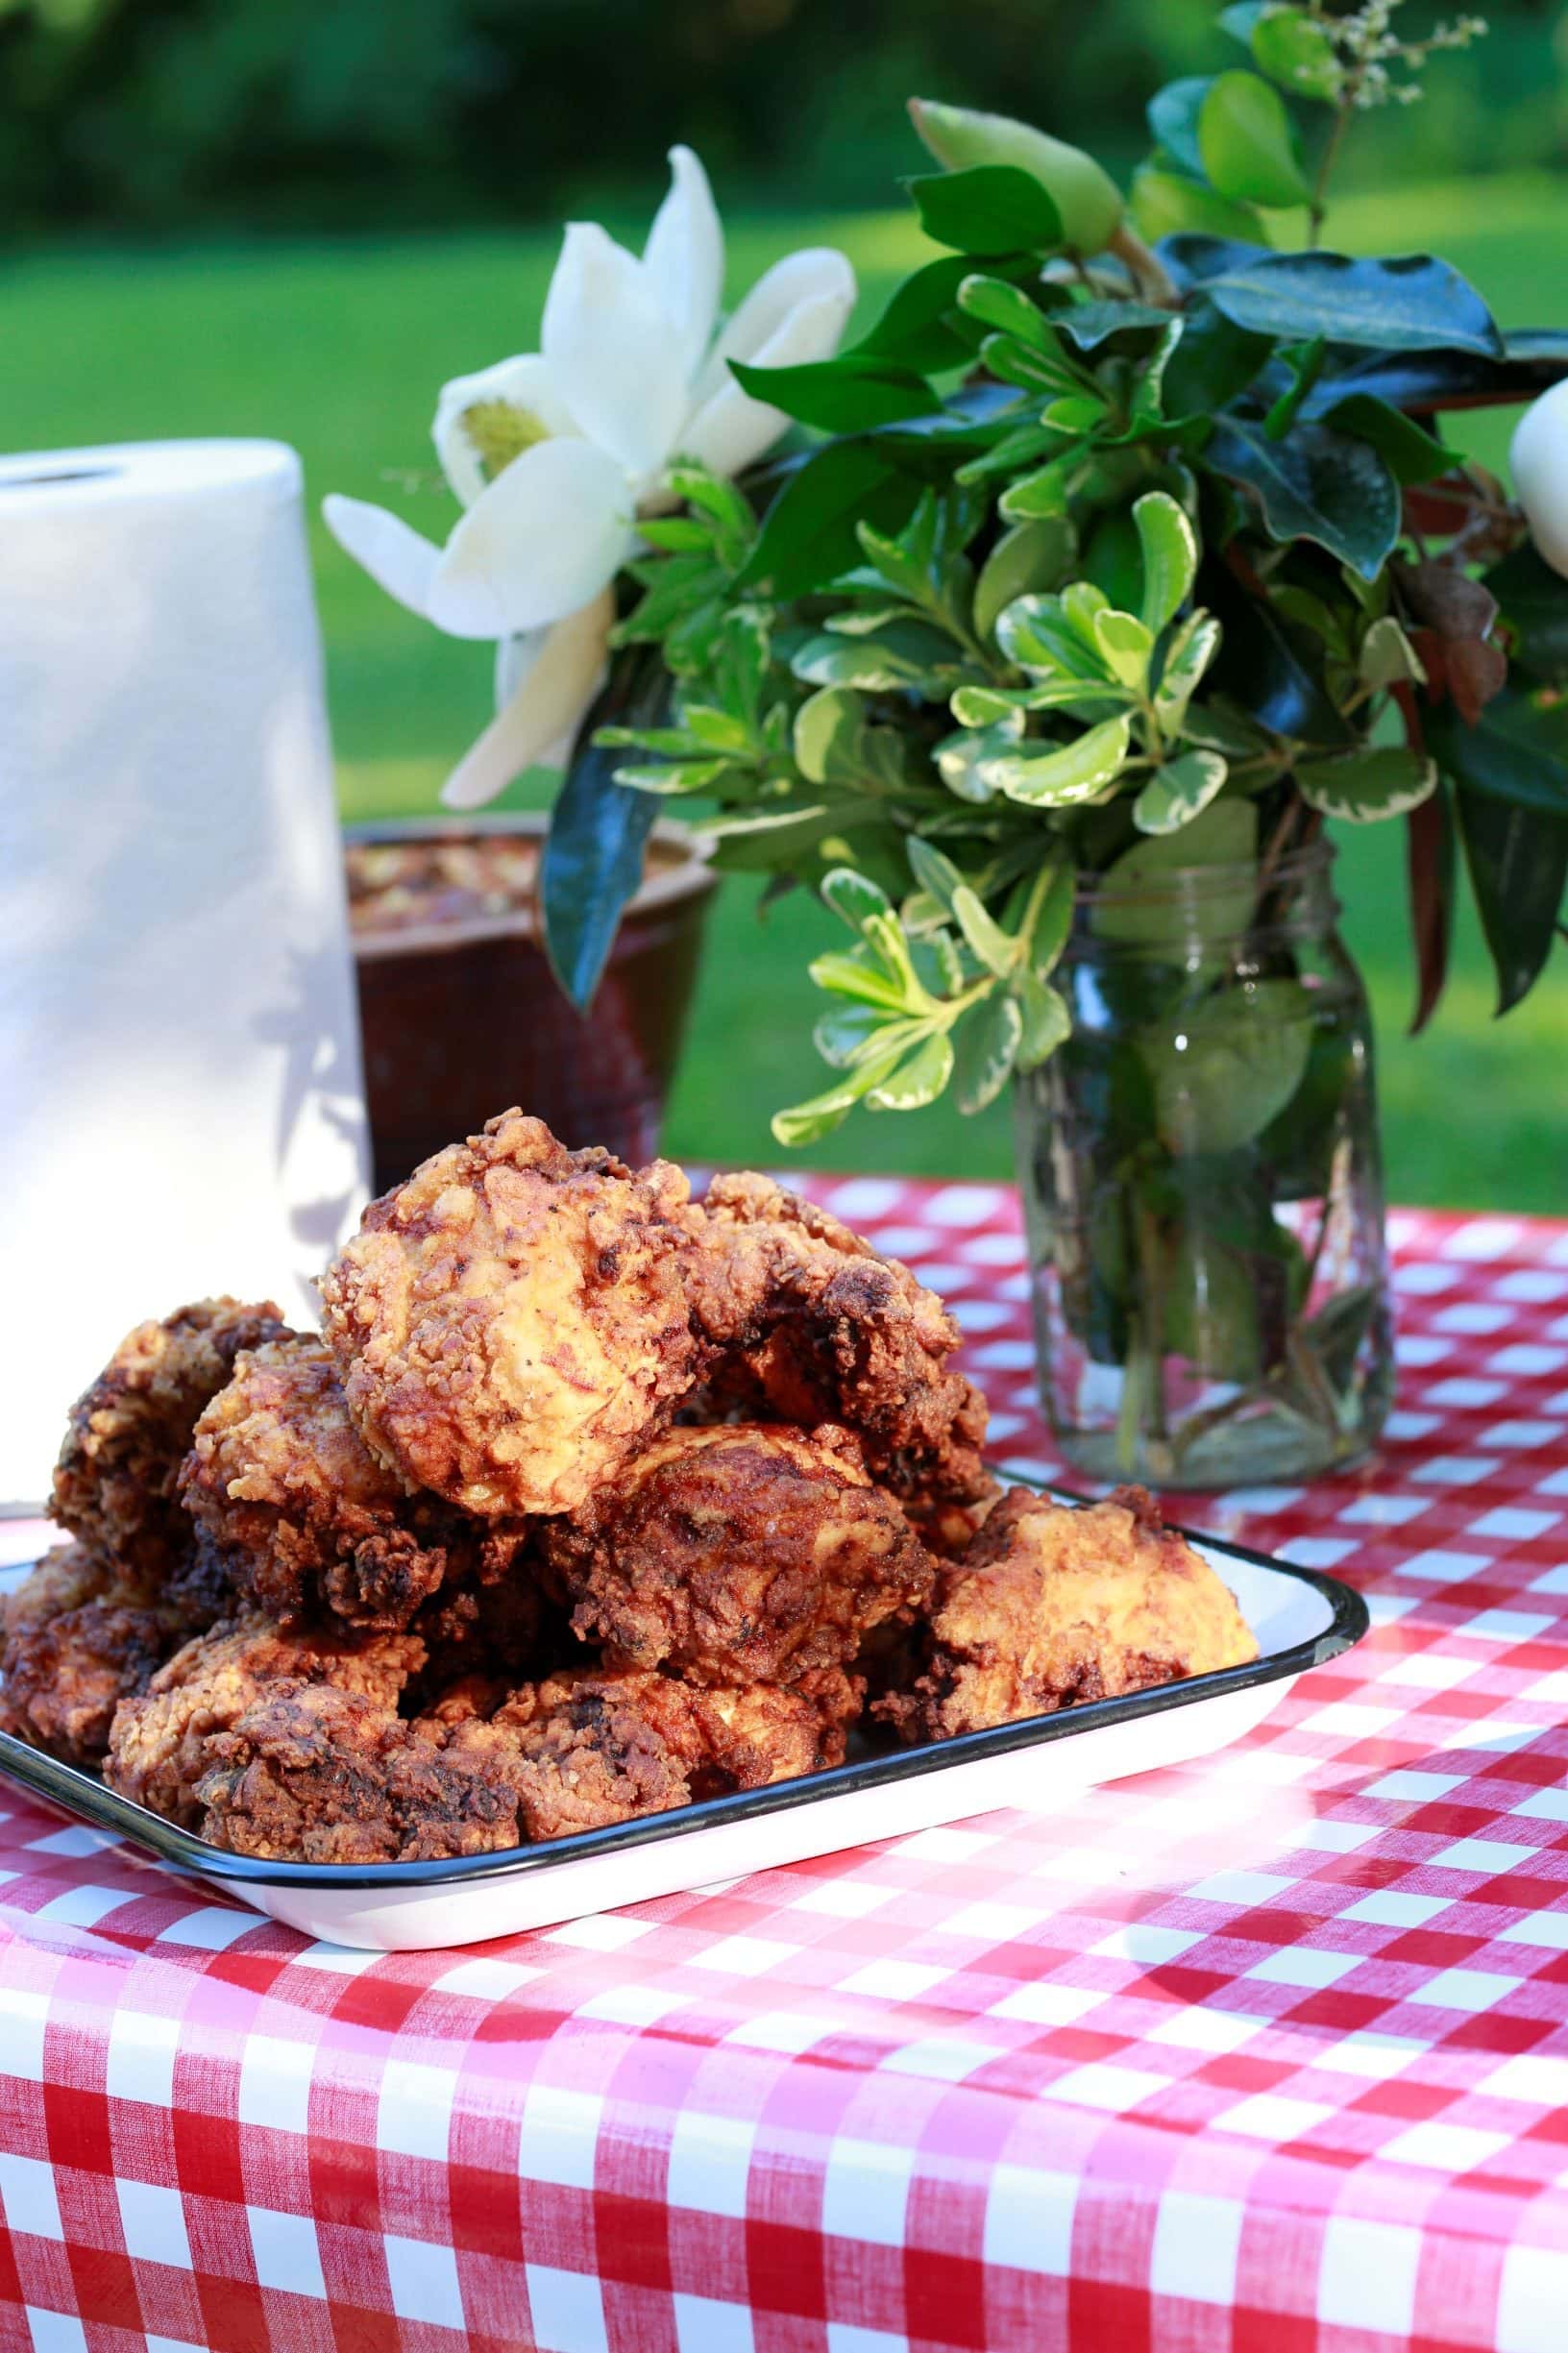 Stacy Lyn's version of her Granny Gray's southern fried chicken recipe